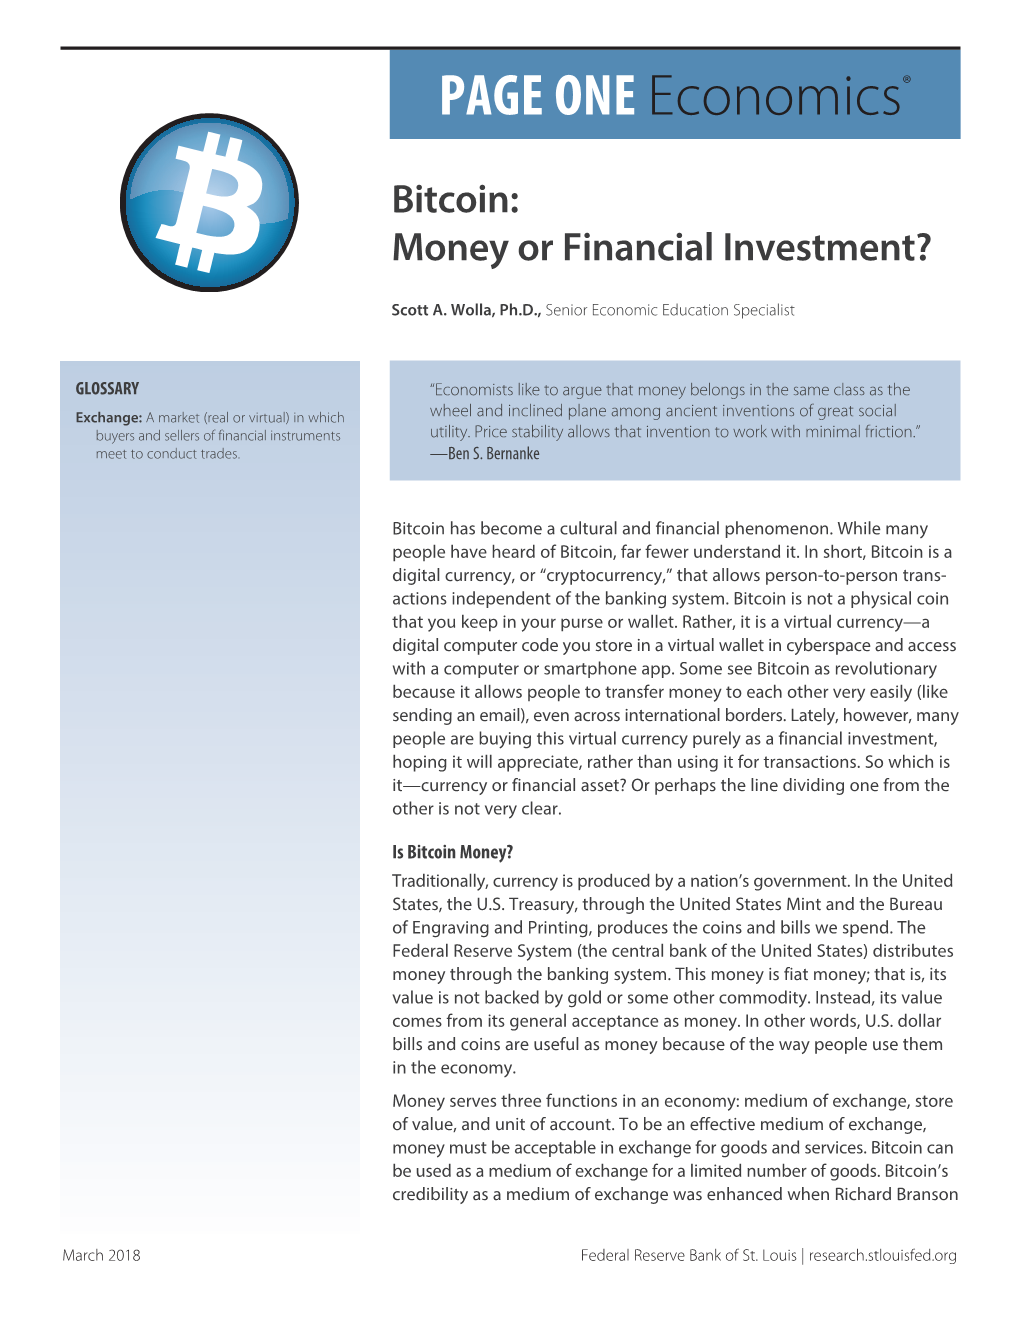 Bitcoin: Money Or Financial Investment?